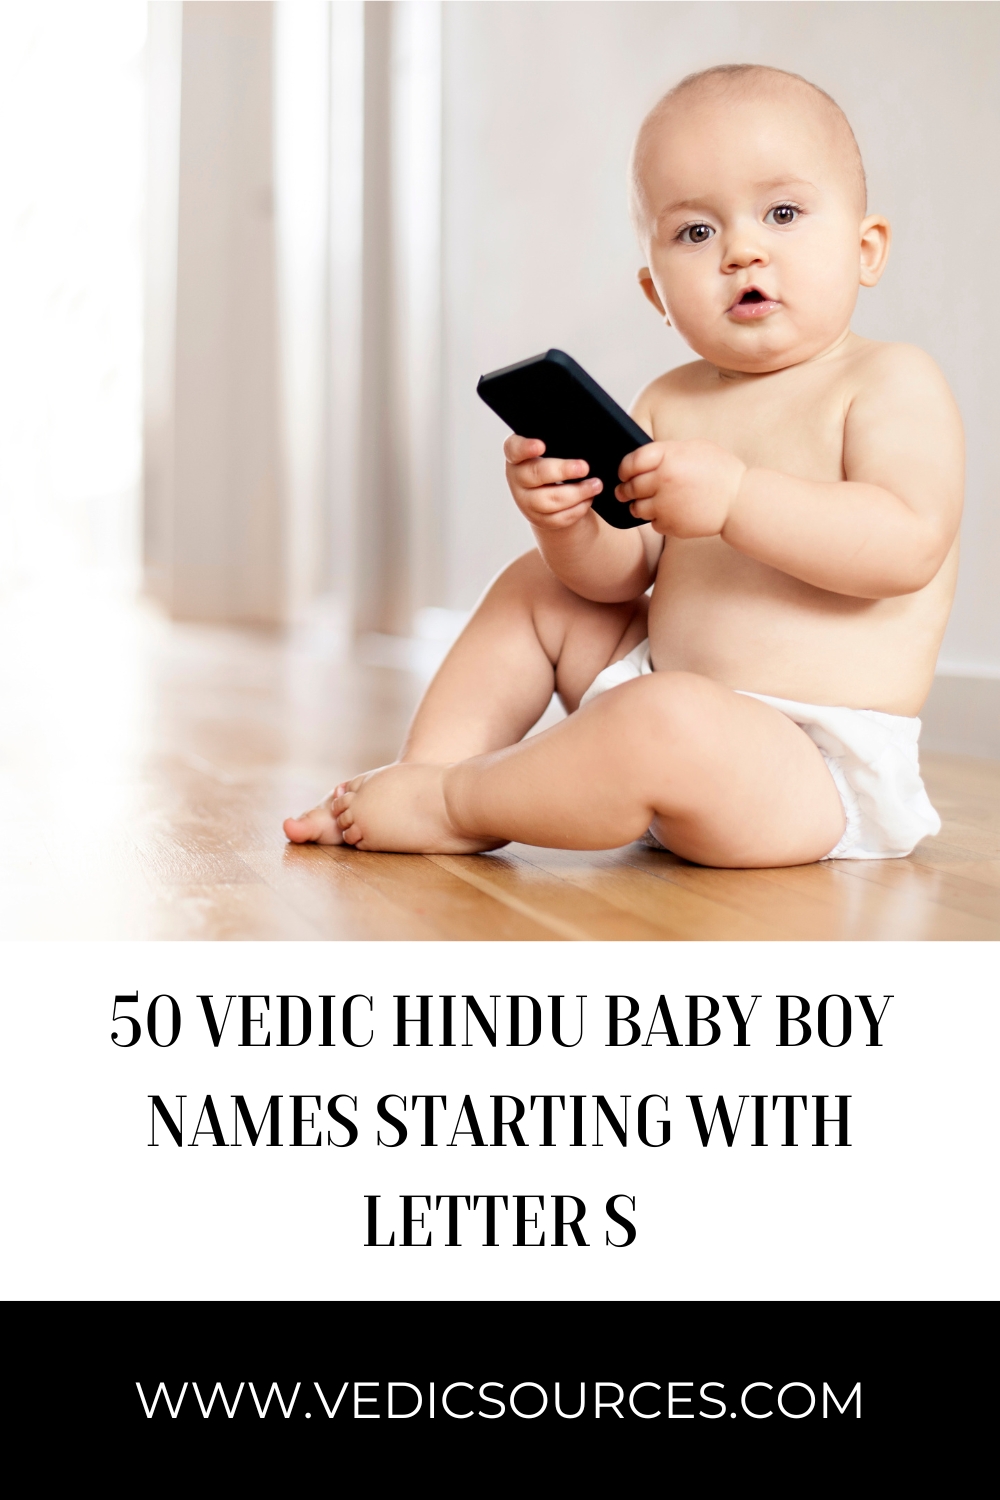 50 Vedic Hindu Baby Boy Names Starting with Letter S